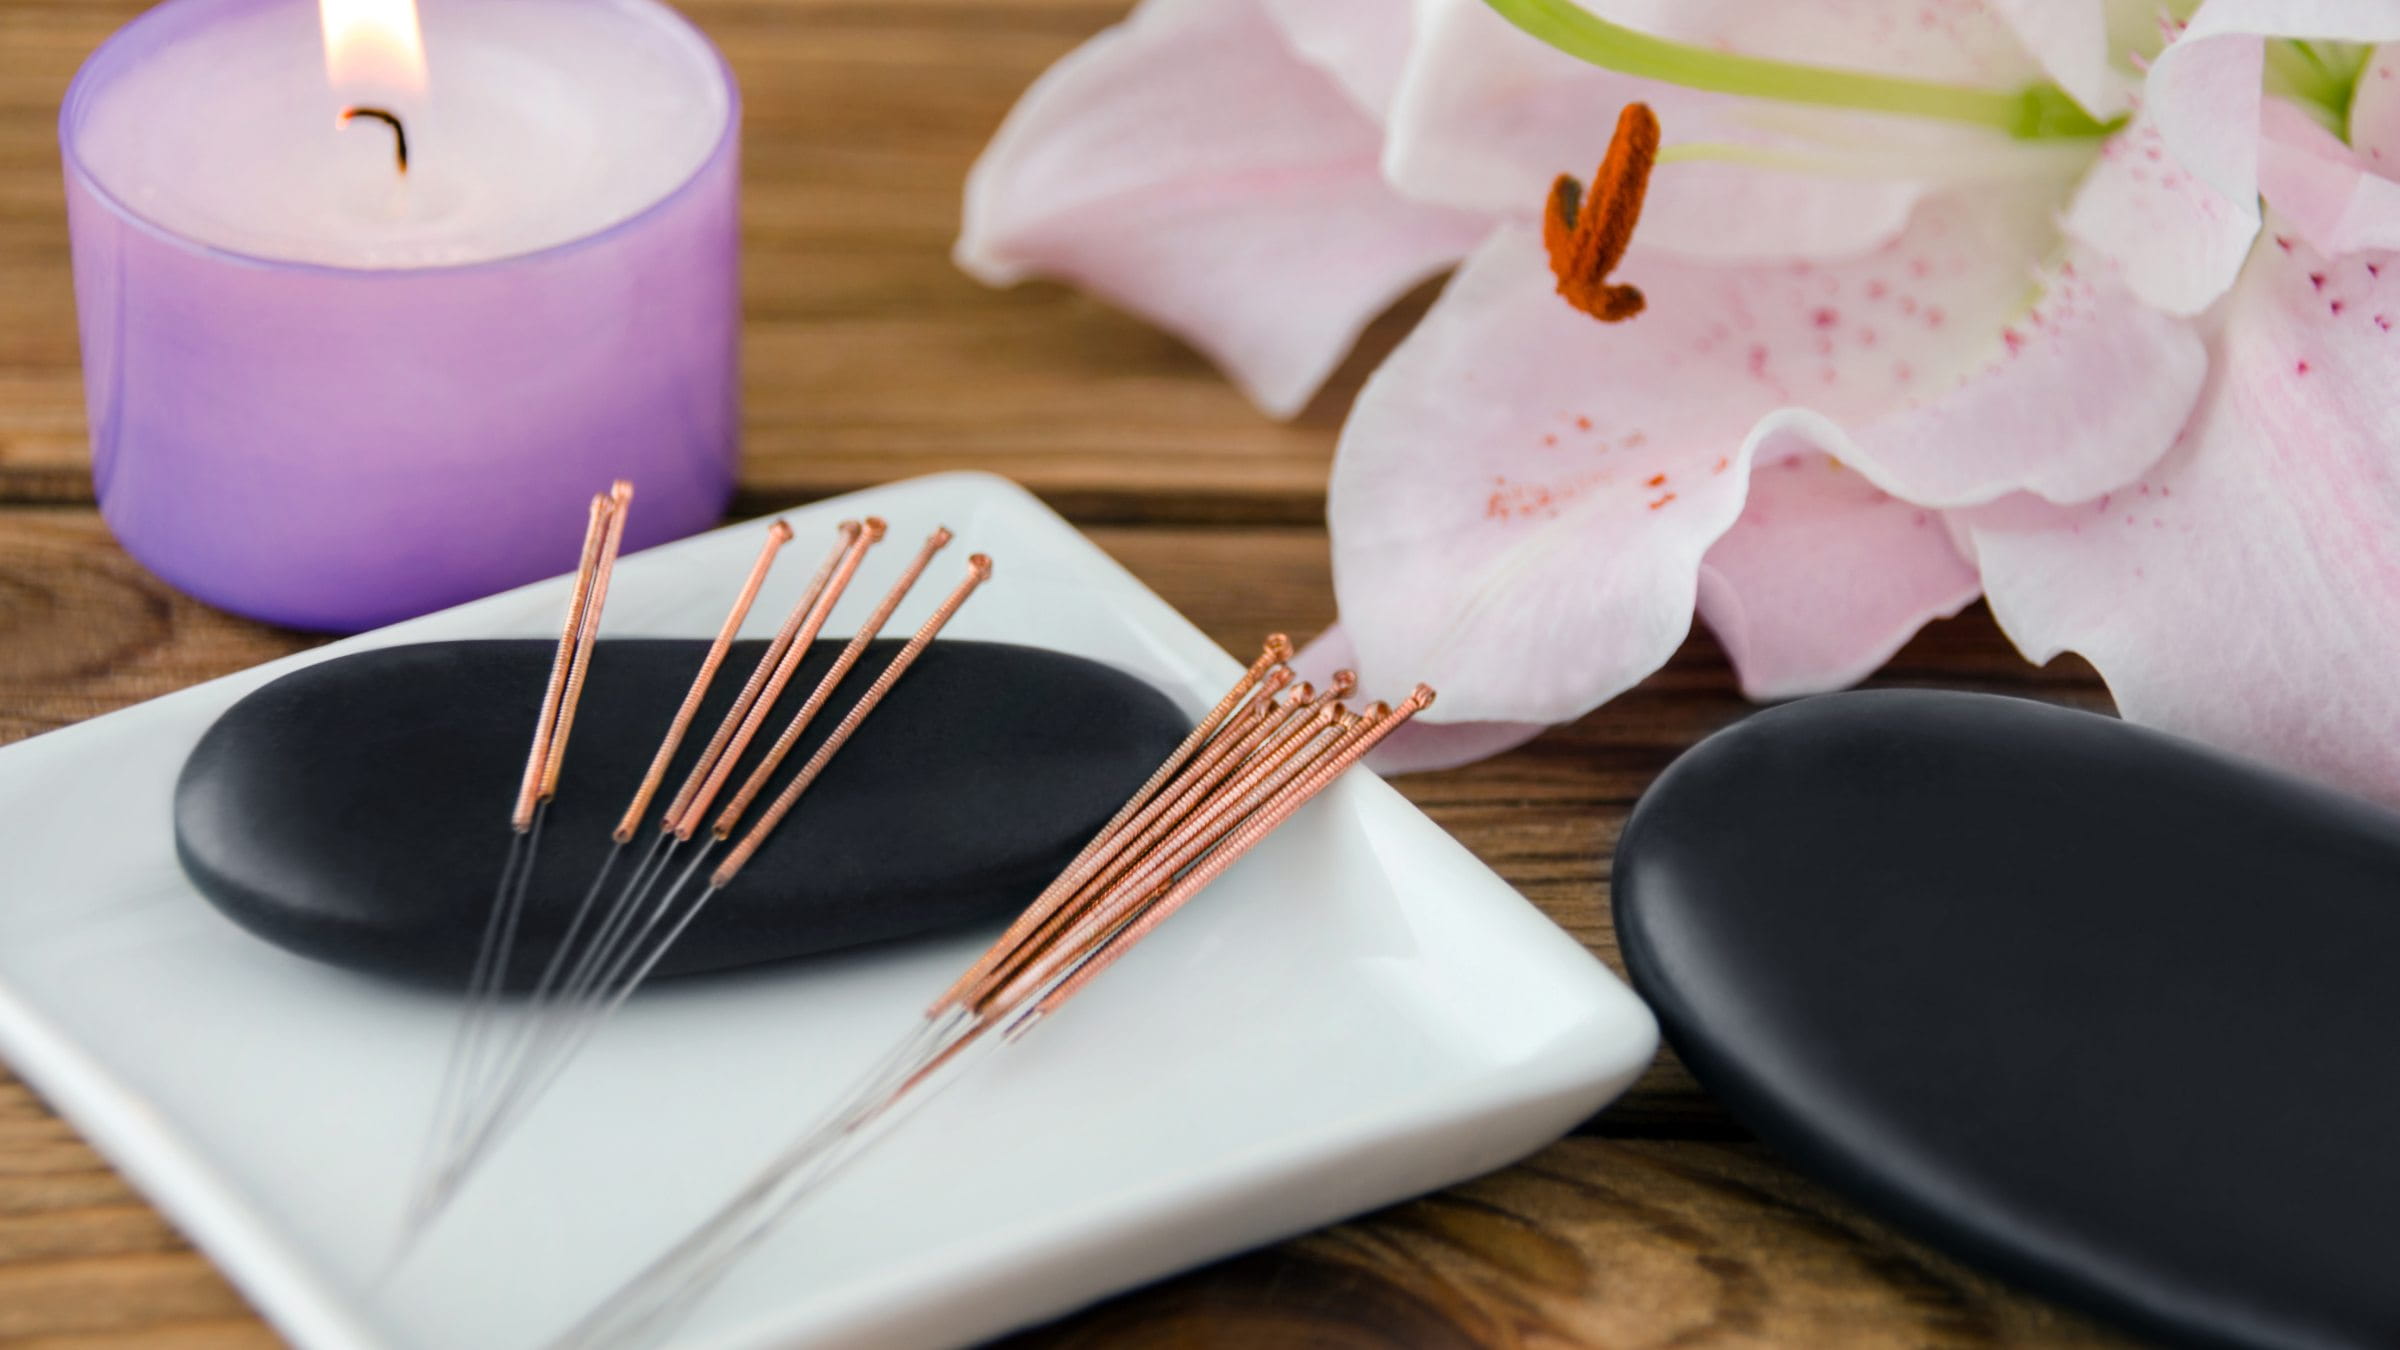 Close up image of a burning candle, acupuncture needles, stones and a flower resting on a wooden surface.